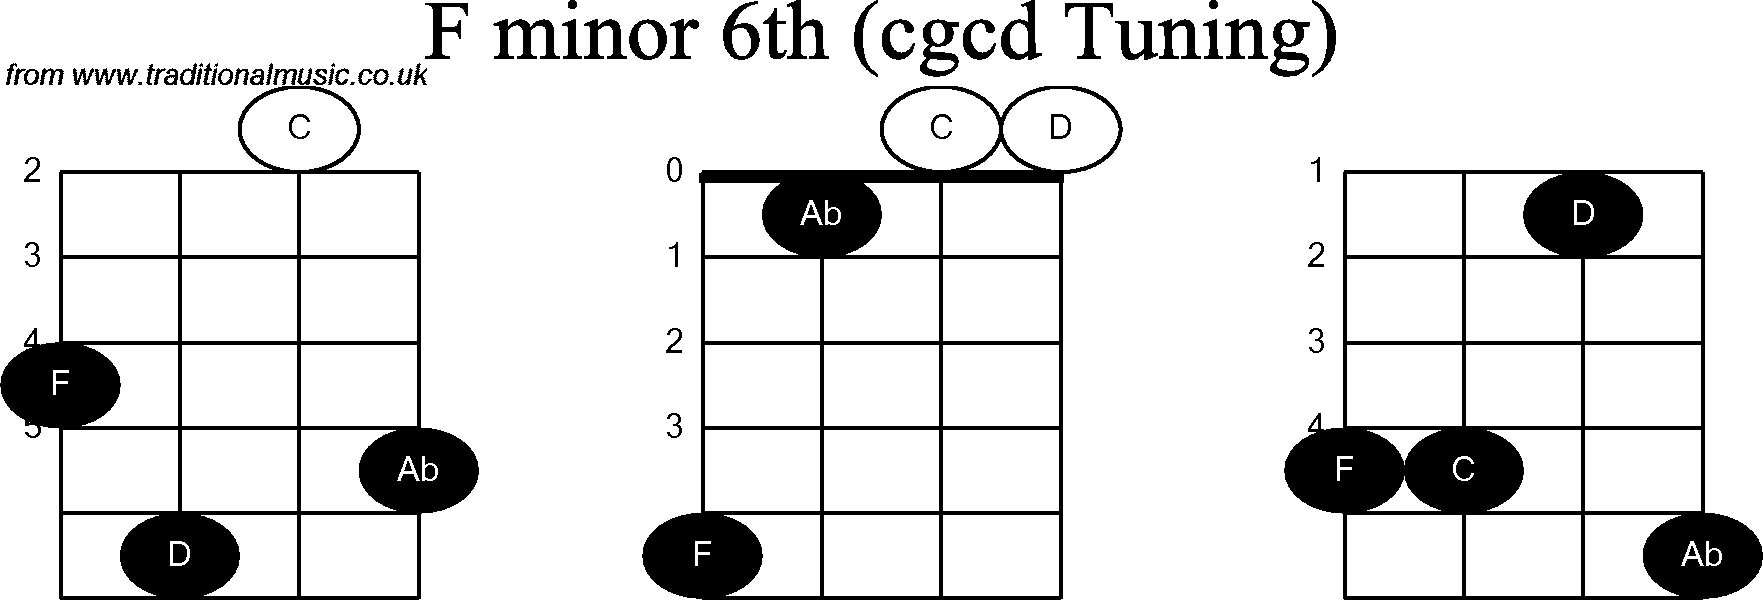 Chord diagrams for Banjo(Double C) F Minor6th